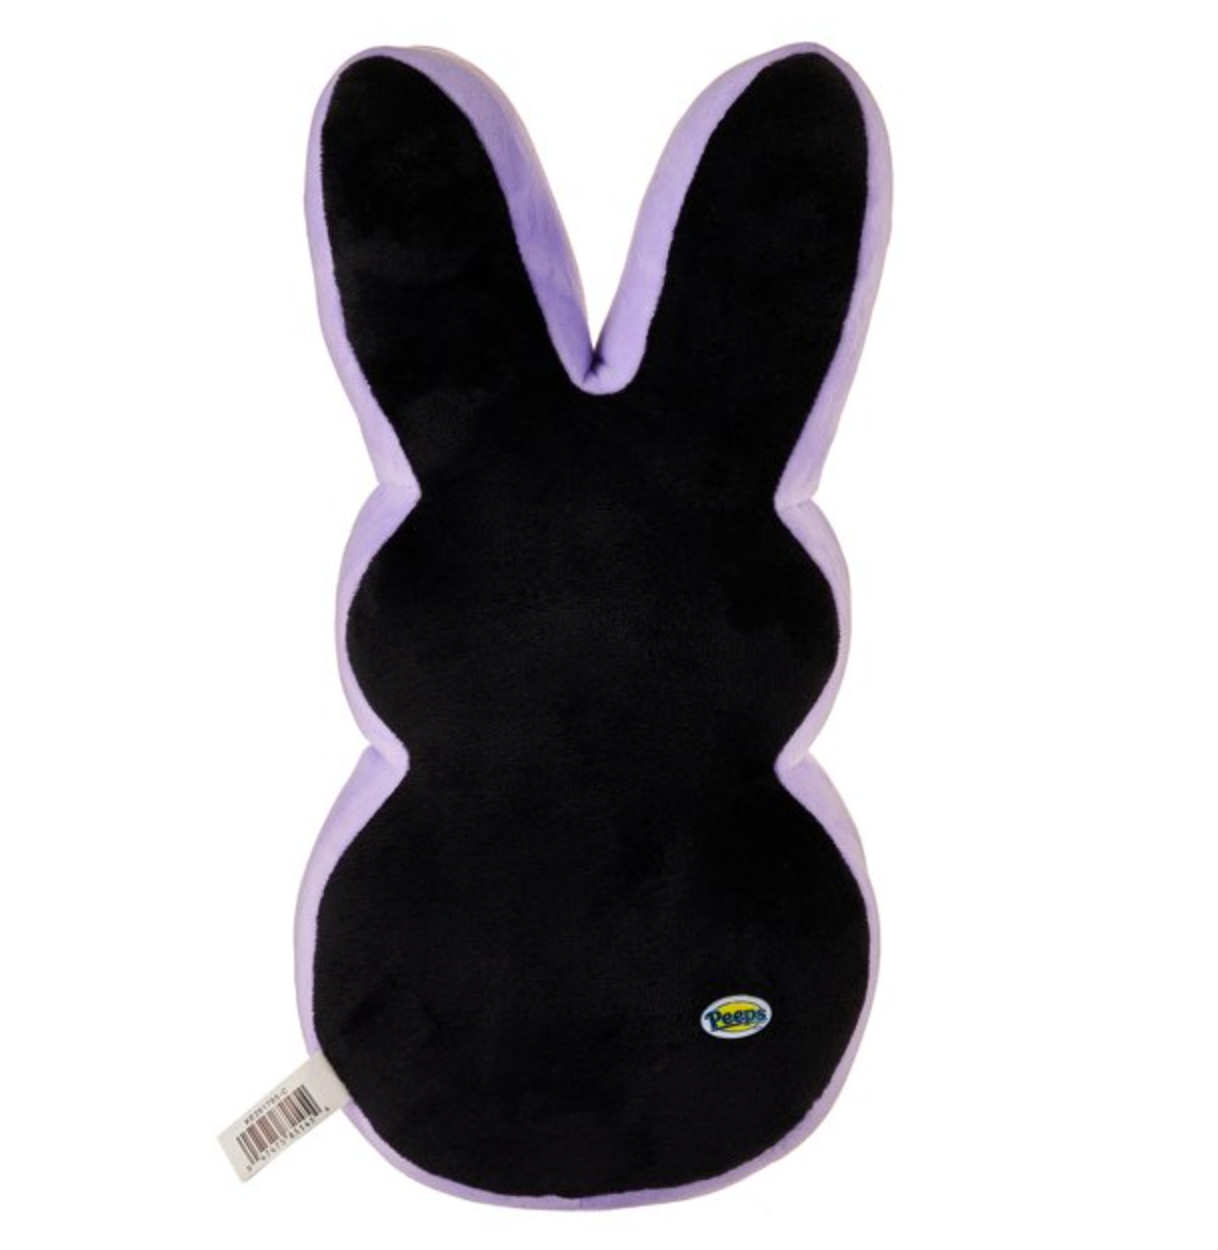 Peeps Easter Peep Bunny Purple Emo 15in Plush New with Tag